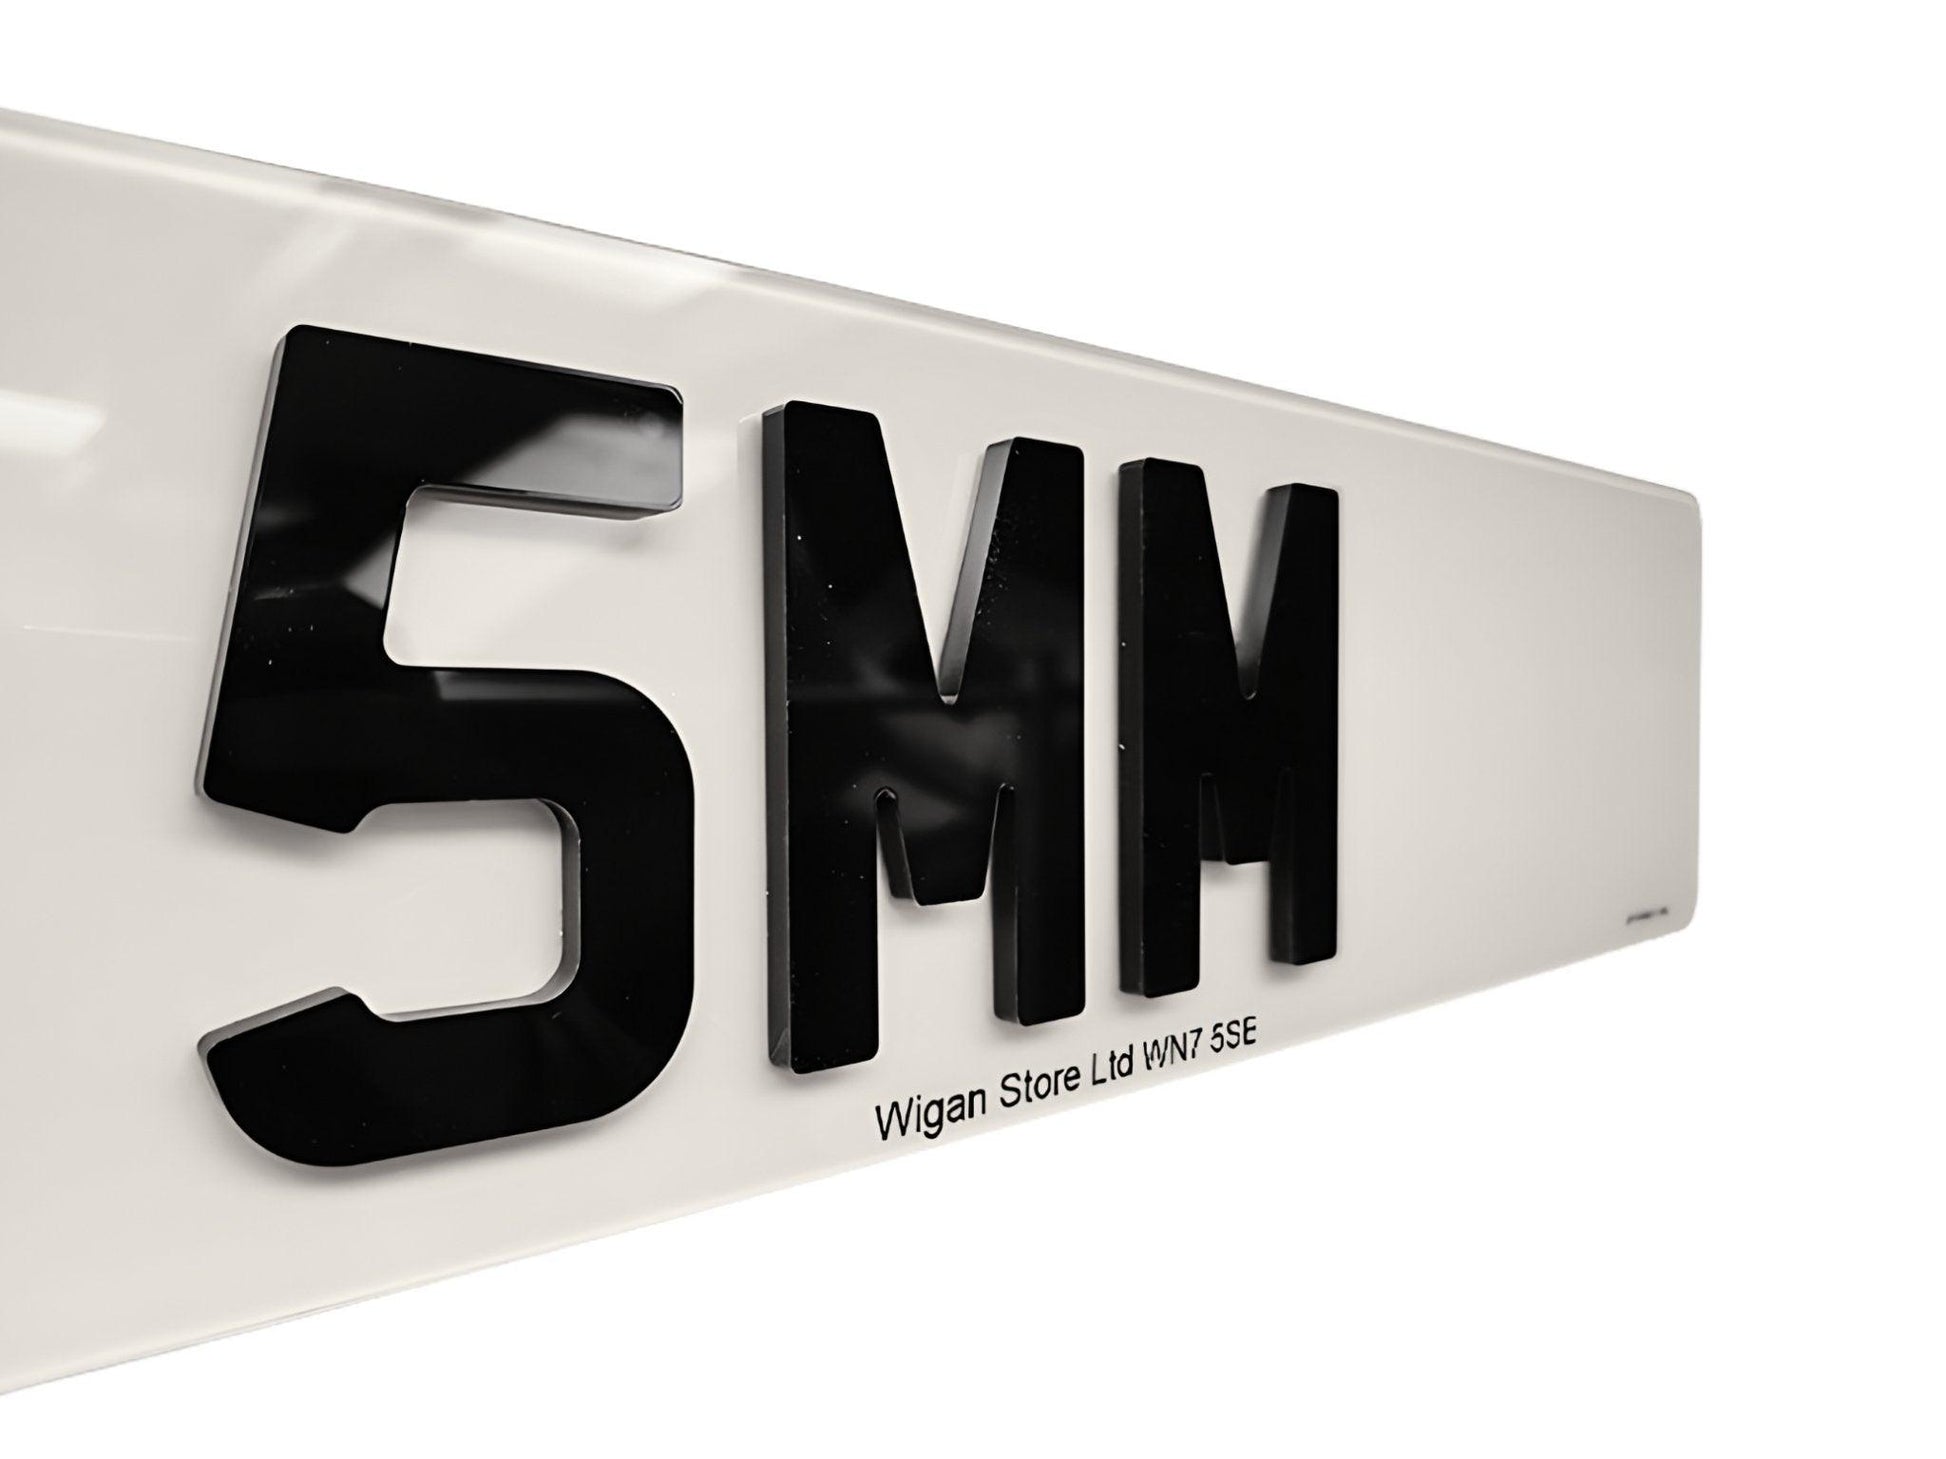 Front 4d 5mm acrylic number plate maker in Leigh www.leighnumberplates.com